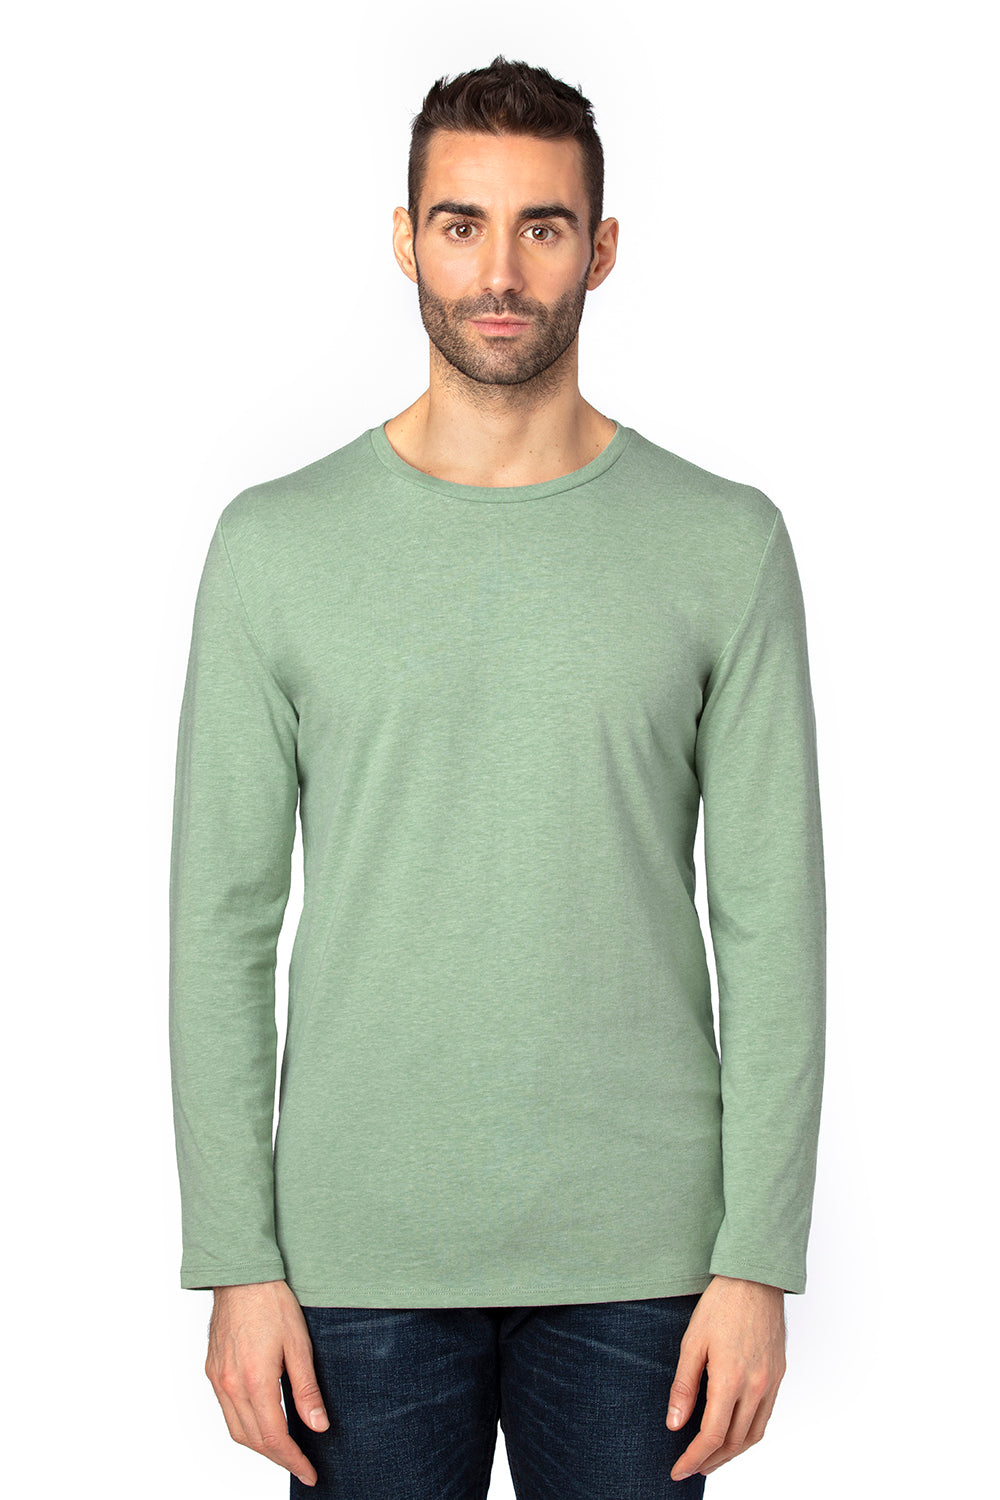 Threadfast Apparel 100LS Mens Ultimate Long Sleeve Crewneck T-Shirt Heather Army Green Front